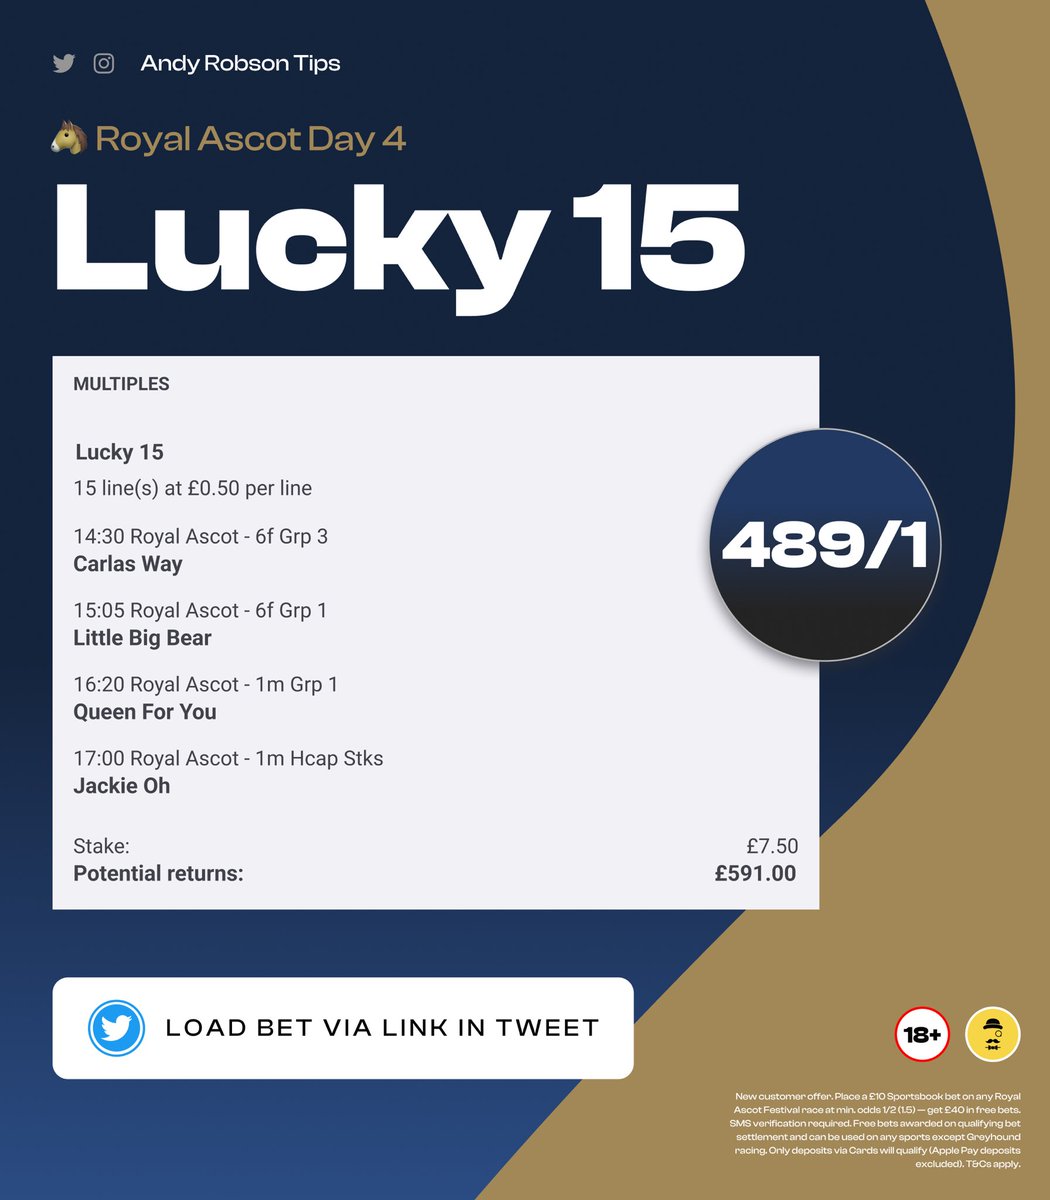 🏇 Day Four: Today's Lucky 15

Load bet: bit.ly/AscoDay4L15

• 14:30: Carlas Way
• 15:05: Little Big Bear
• 16:20: Queen For You
• 17:00: Jackie Oh

My bet for the day. £7.50 total stake with 50p on the lines.

18+, gamble responsibly. Ad.